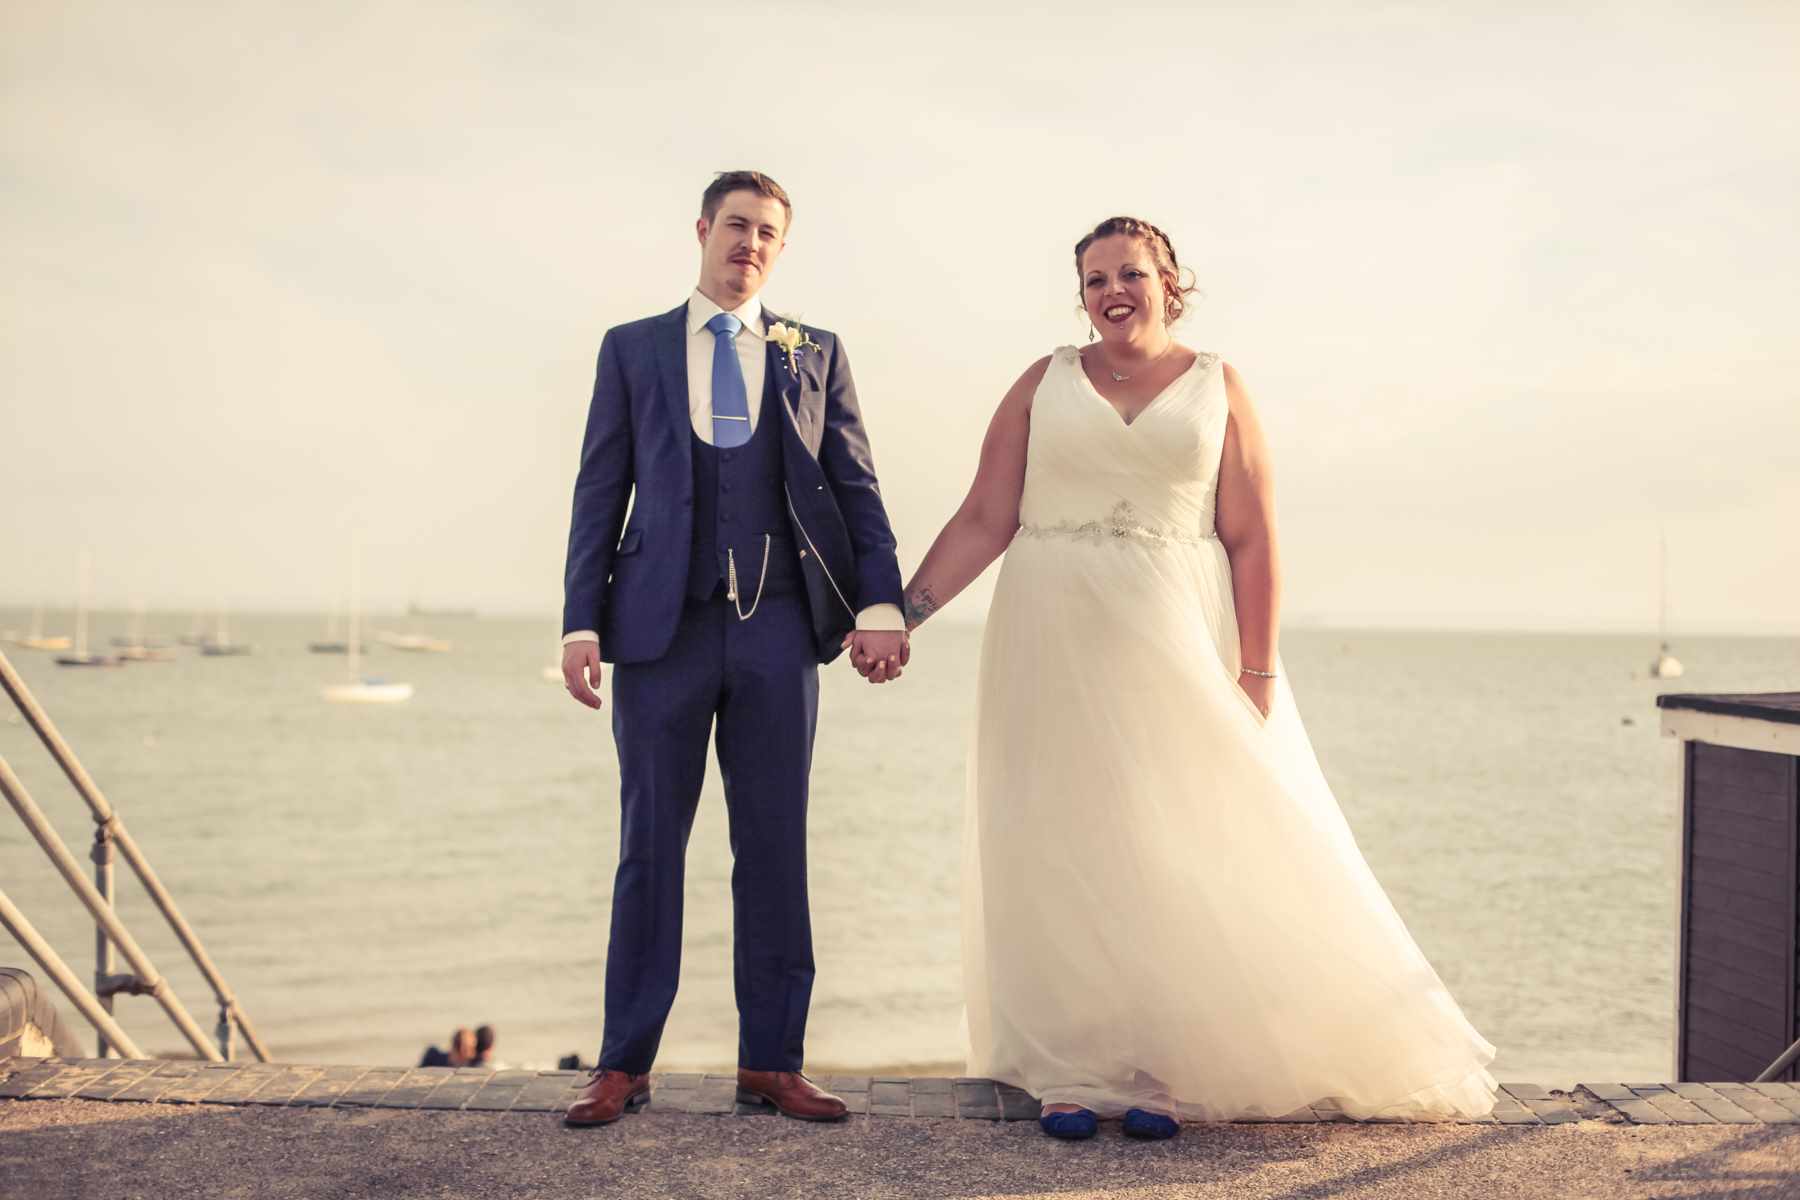 Bride and Groom holding hands at a wedding next to the sea in essex.